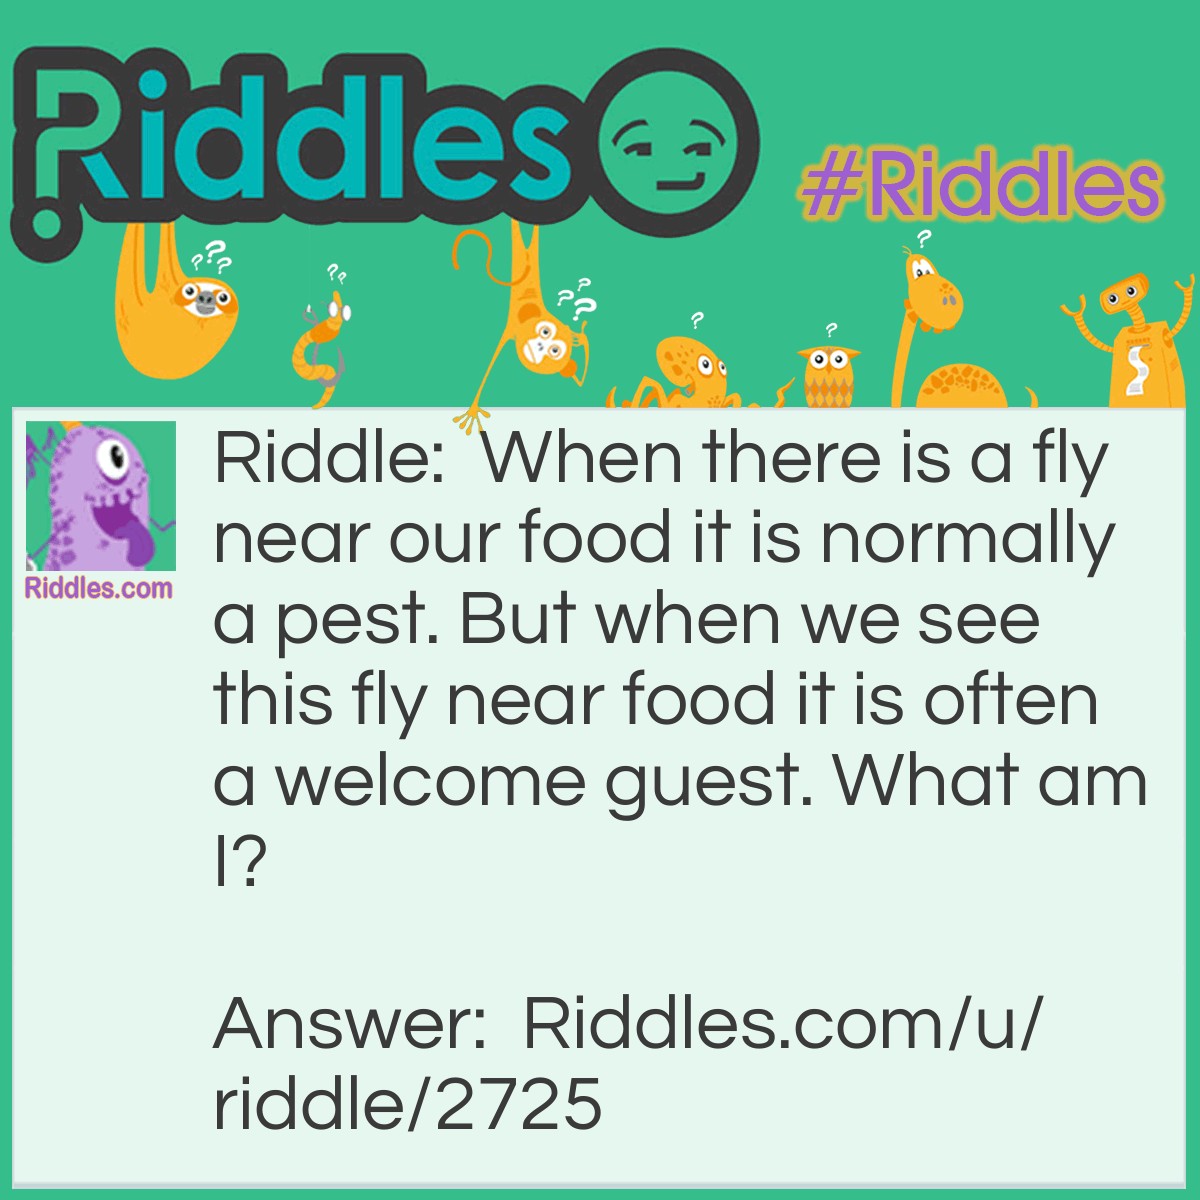 Riddle: When there is a fly near our food it is normally a pest. But when we see this fly near food it is often a welcome guest. What am I? Answer: A butterfly.